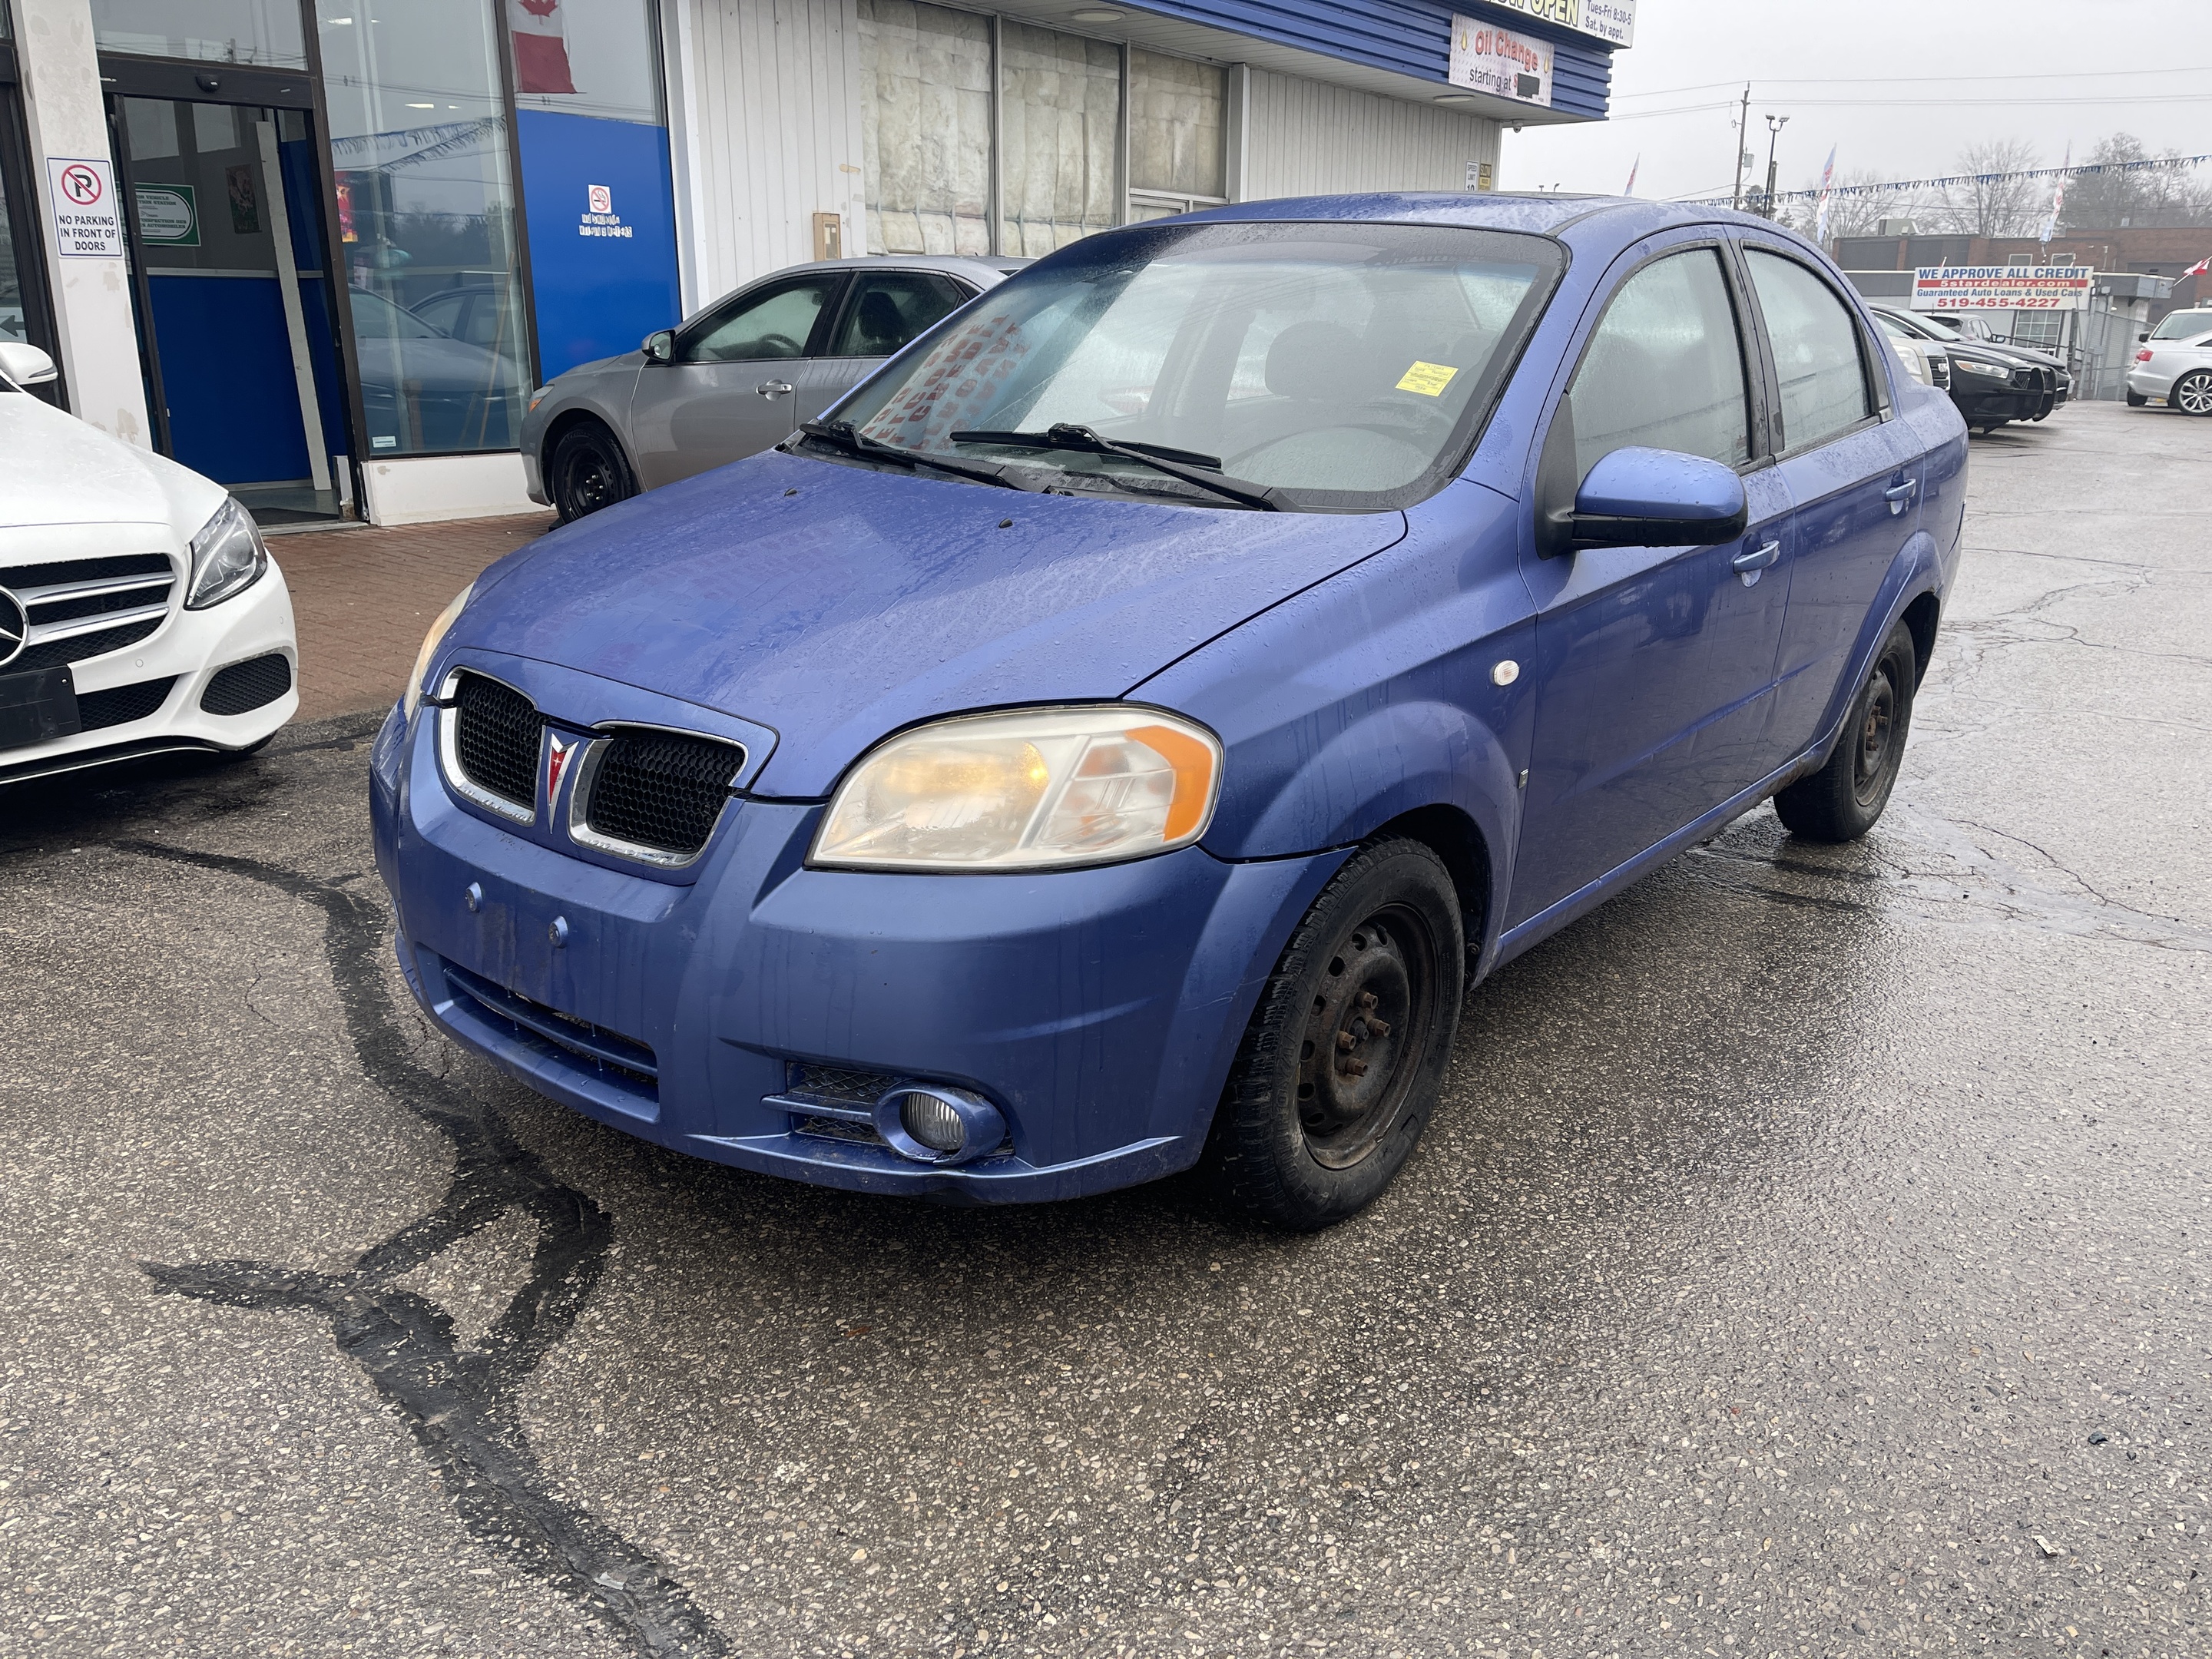 2008 Pontiac Wave WE FINANCE ALL CREDIT | 500+ VEHICLES IN STOCK 